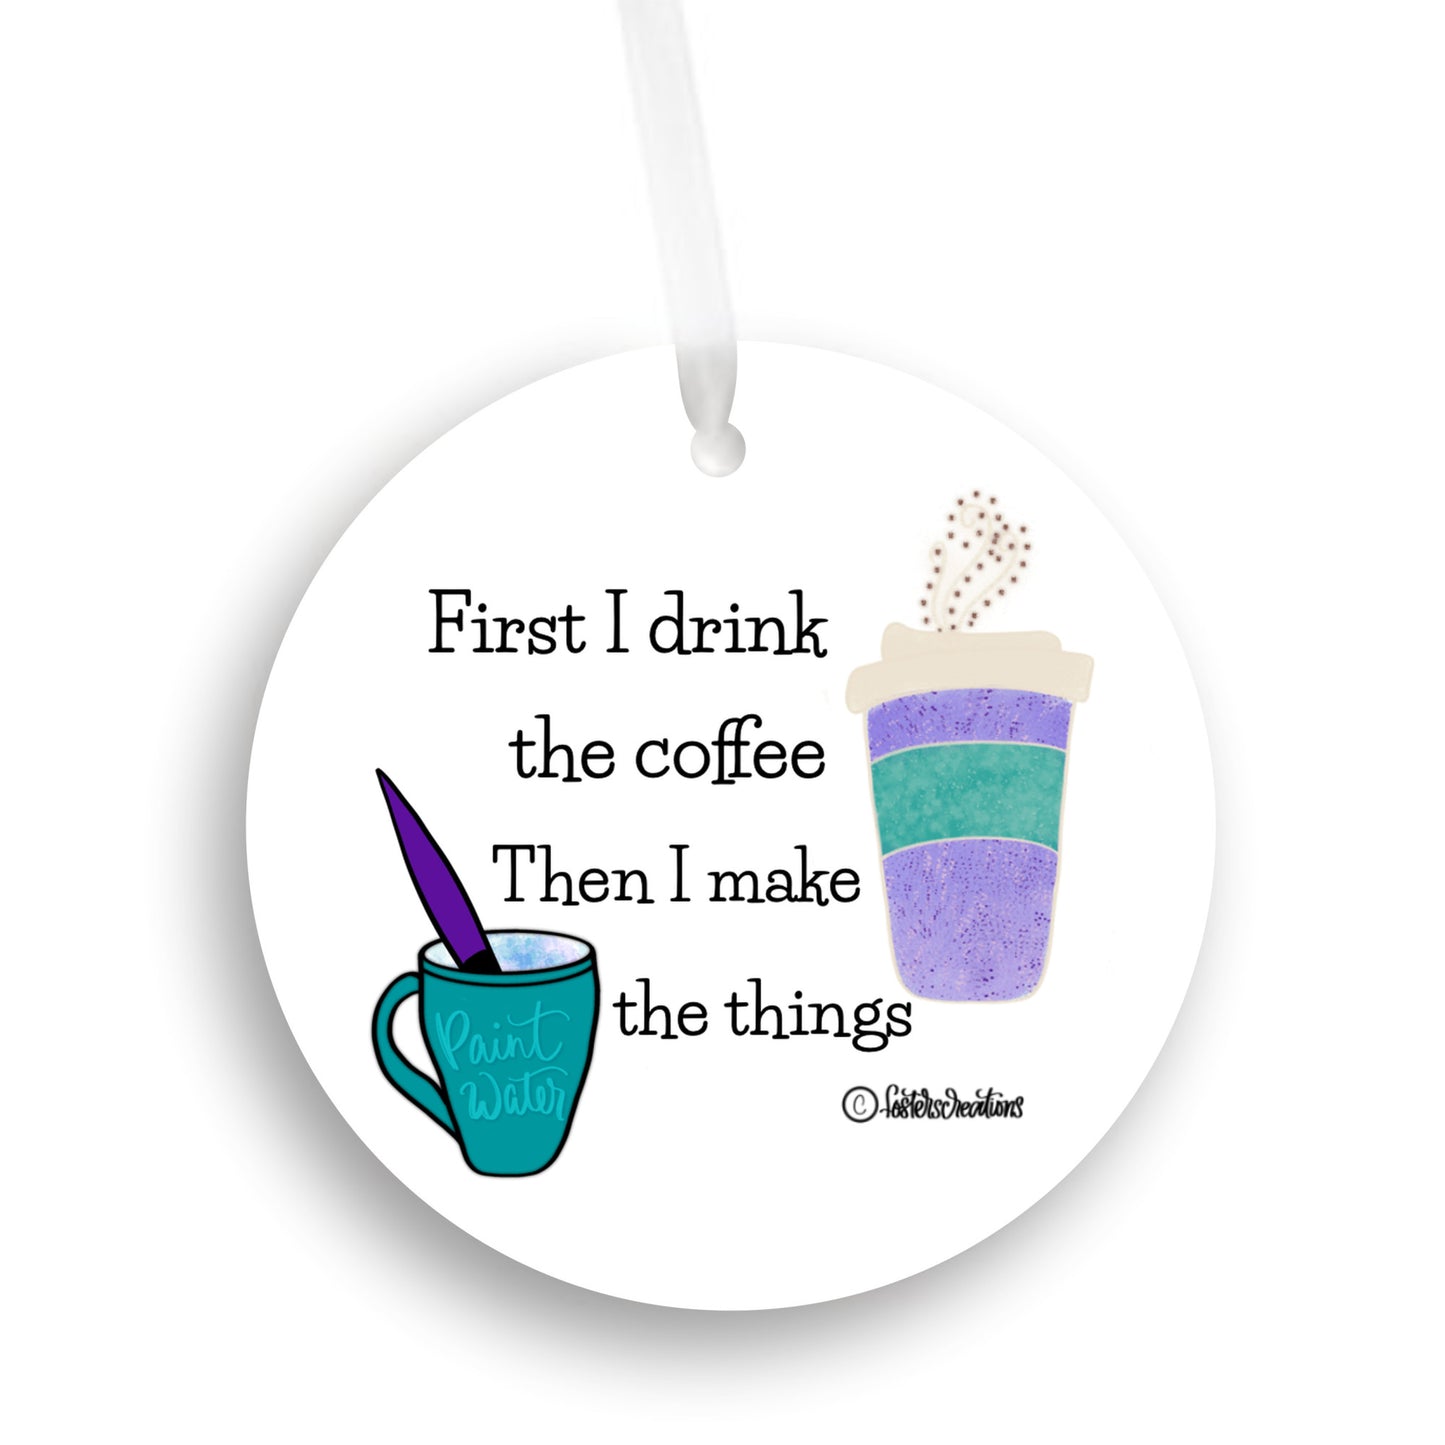 First I drink the coffee, then I make the things